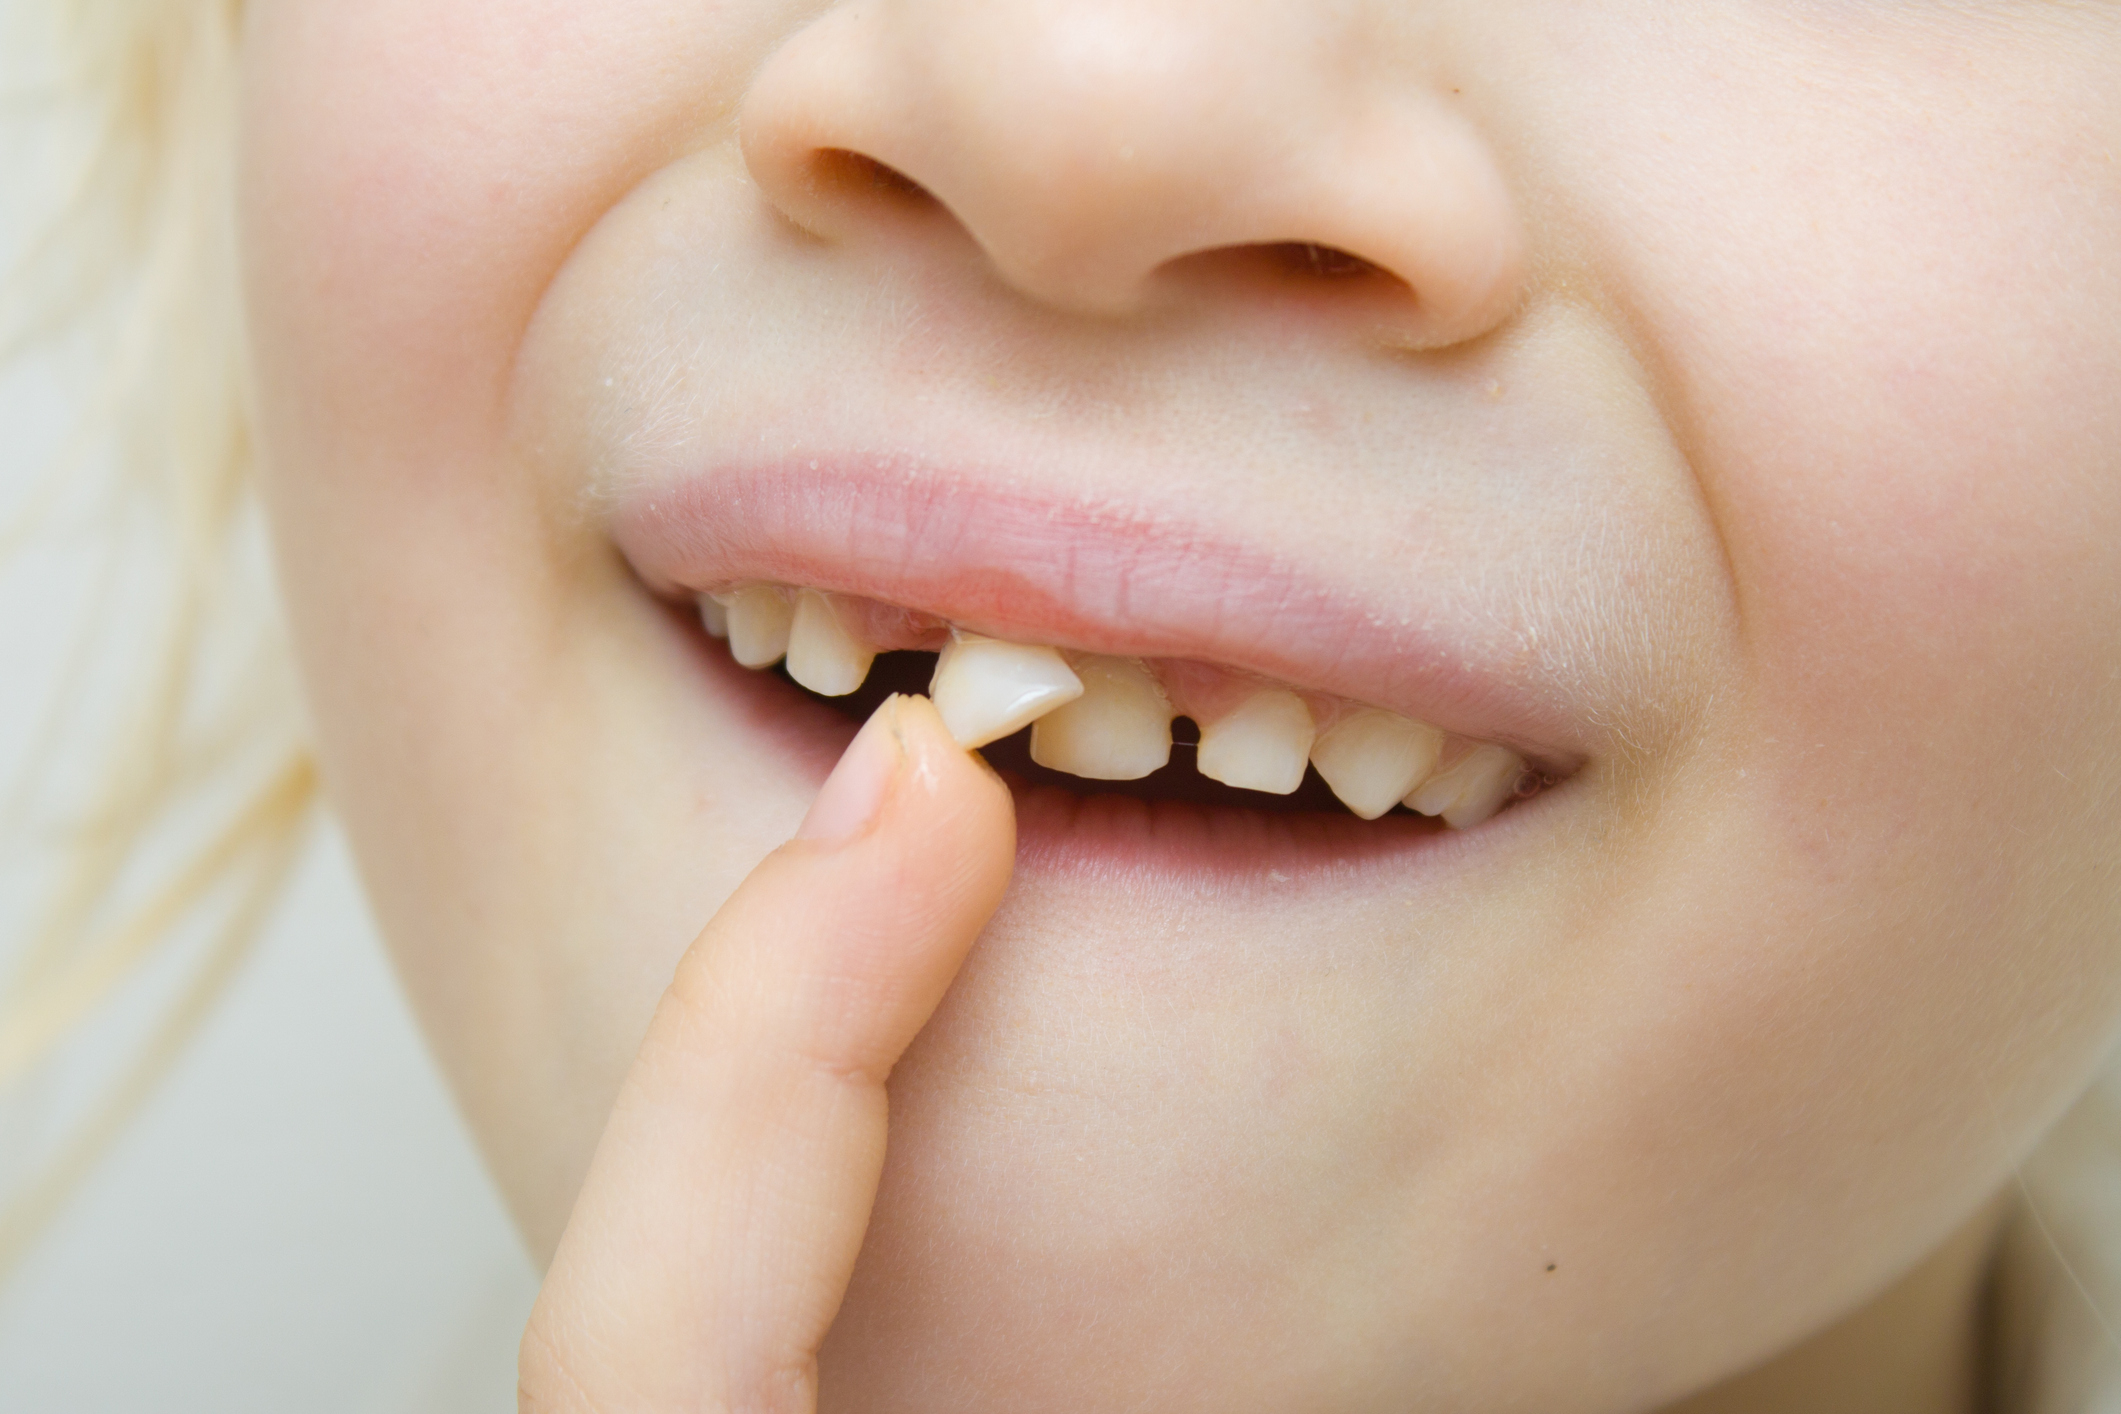 Child pointing to a lost tooth in their smile